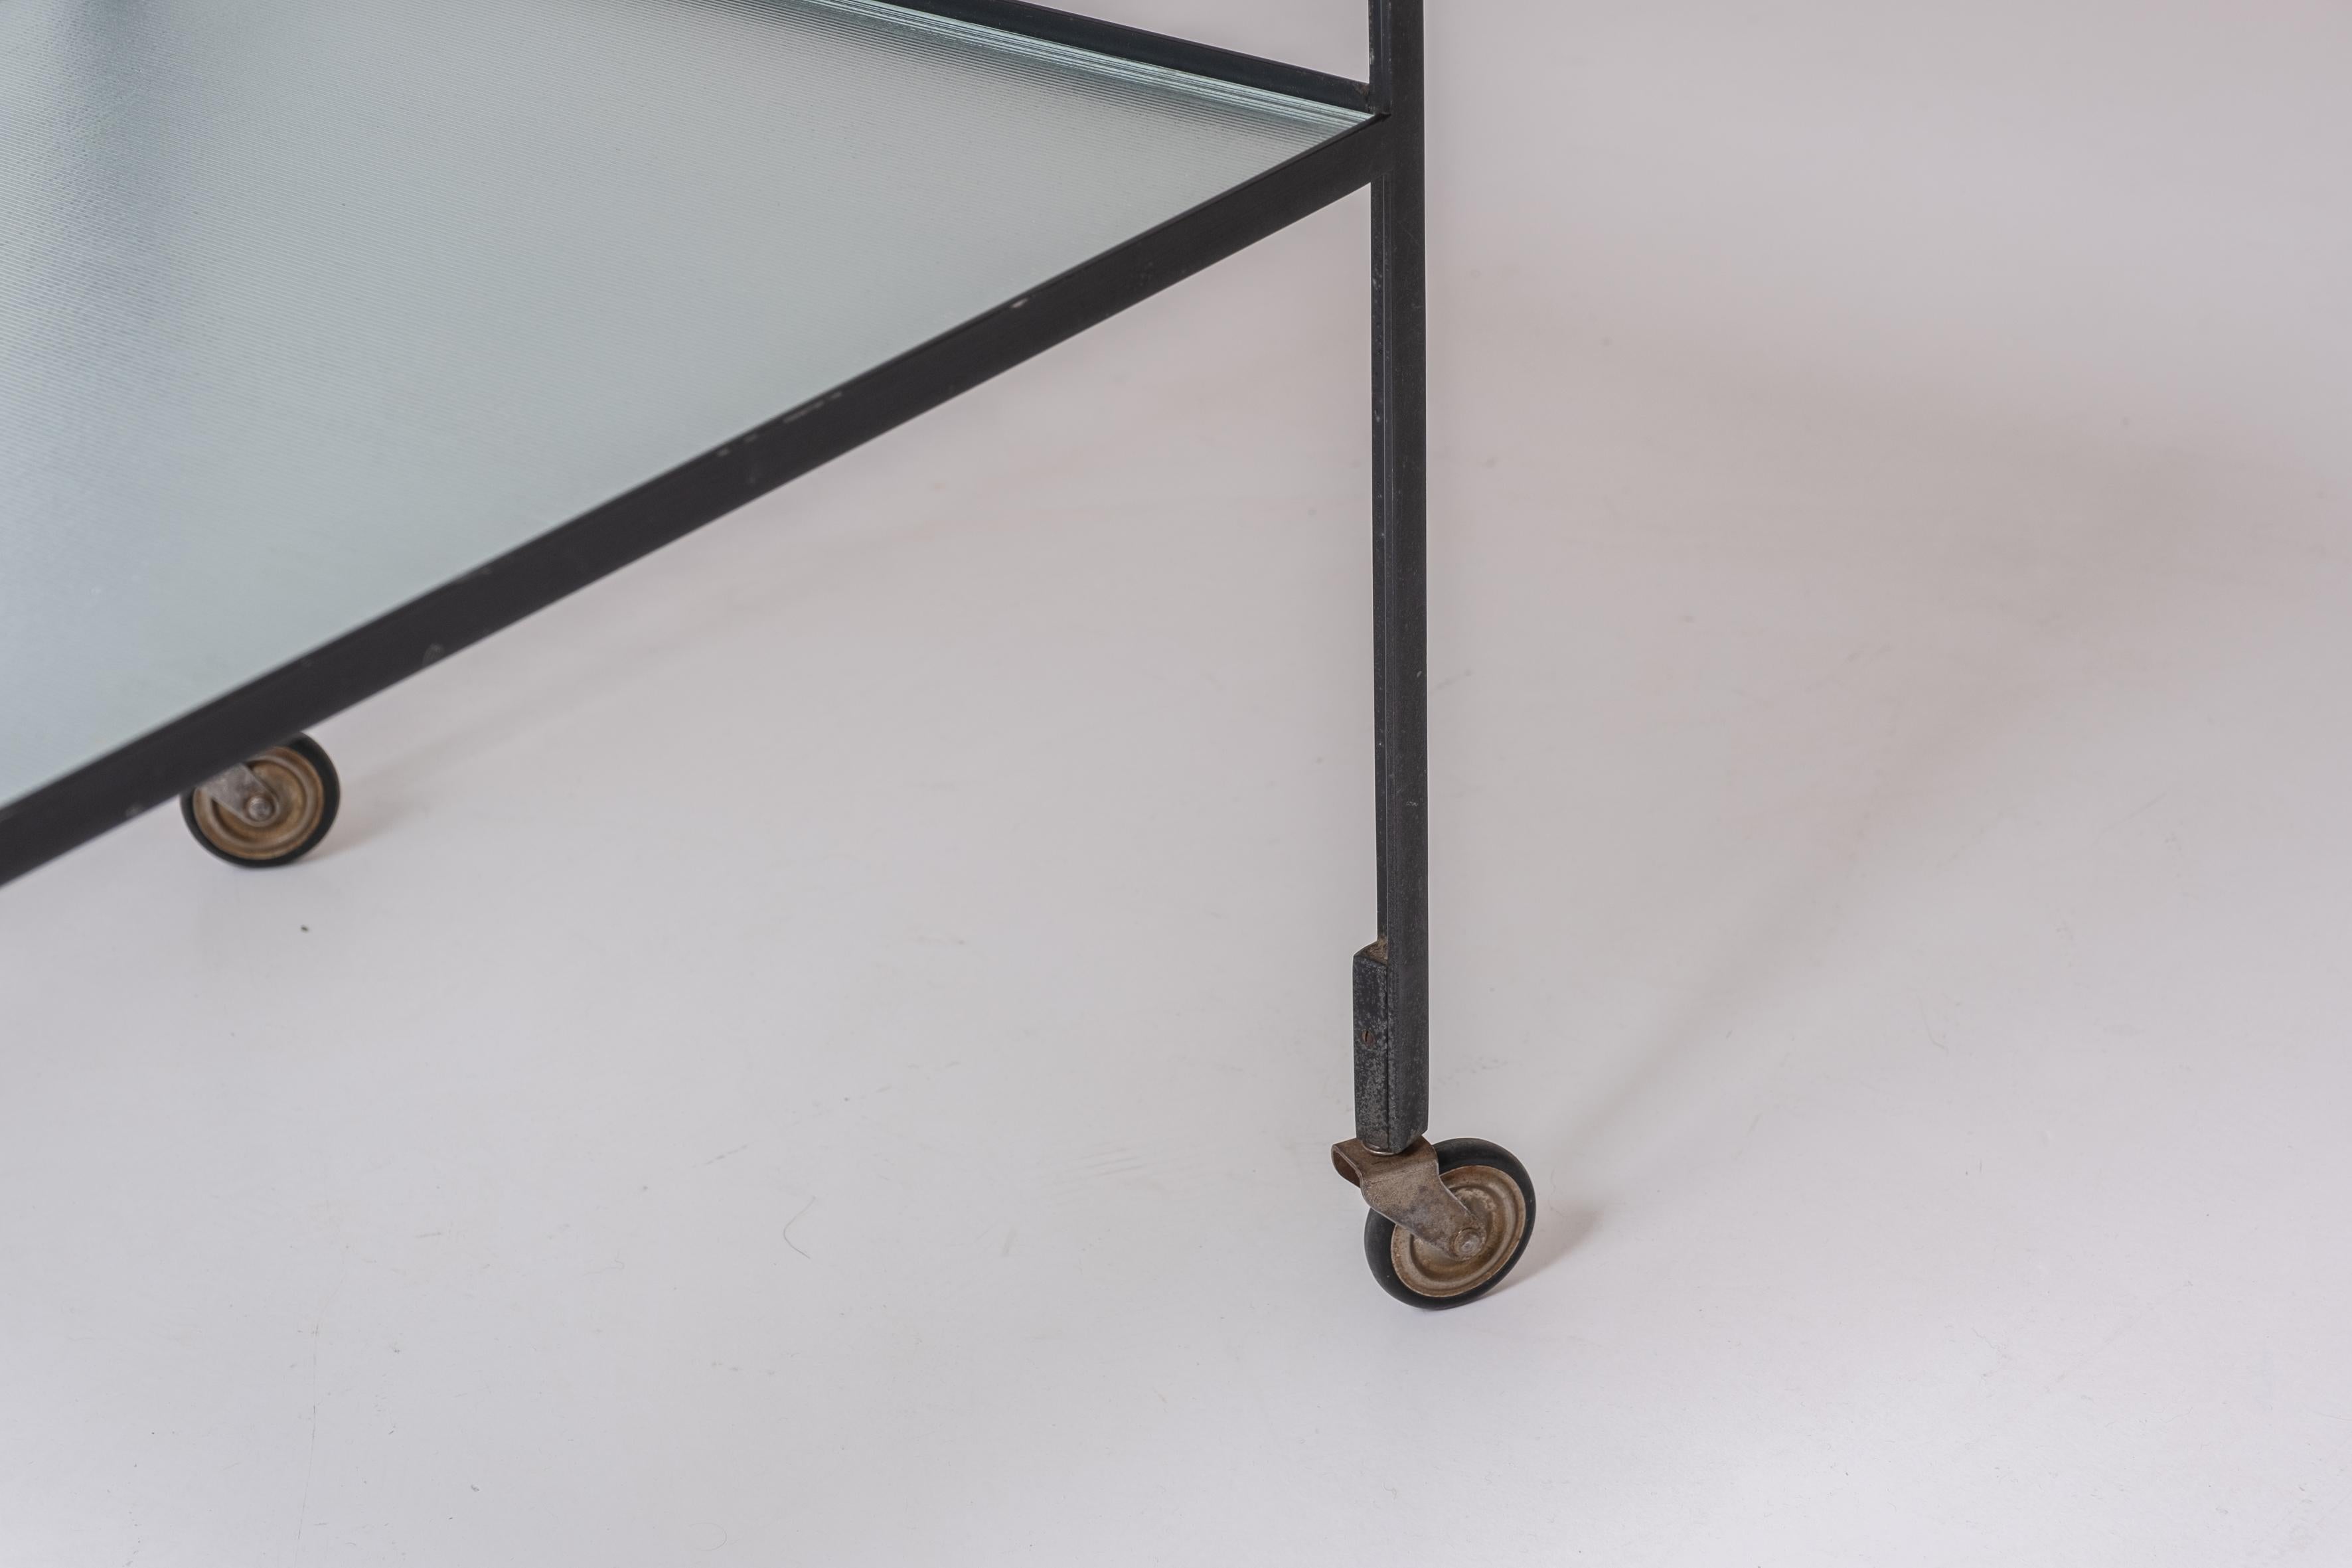 Steel Serving Trolley by Herbert Hirche for Christian Holzäpfel KG, Germany, 1956 For Sale